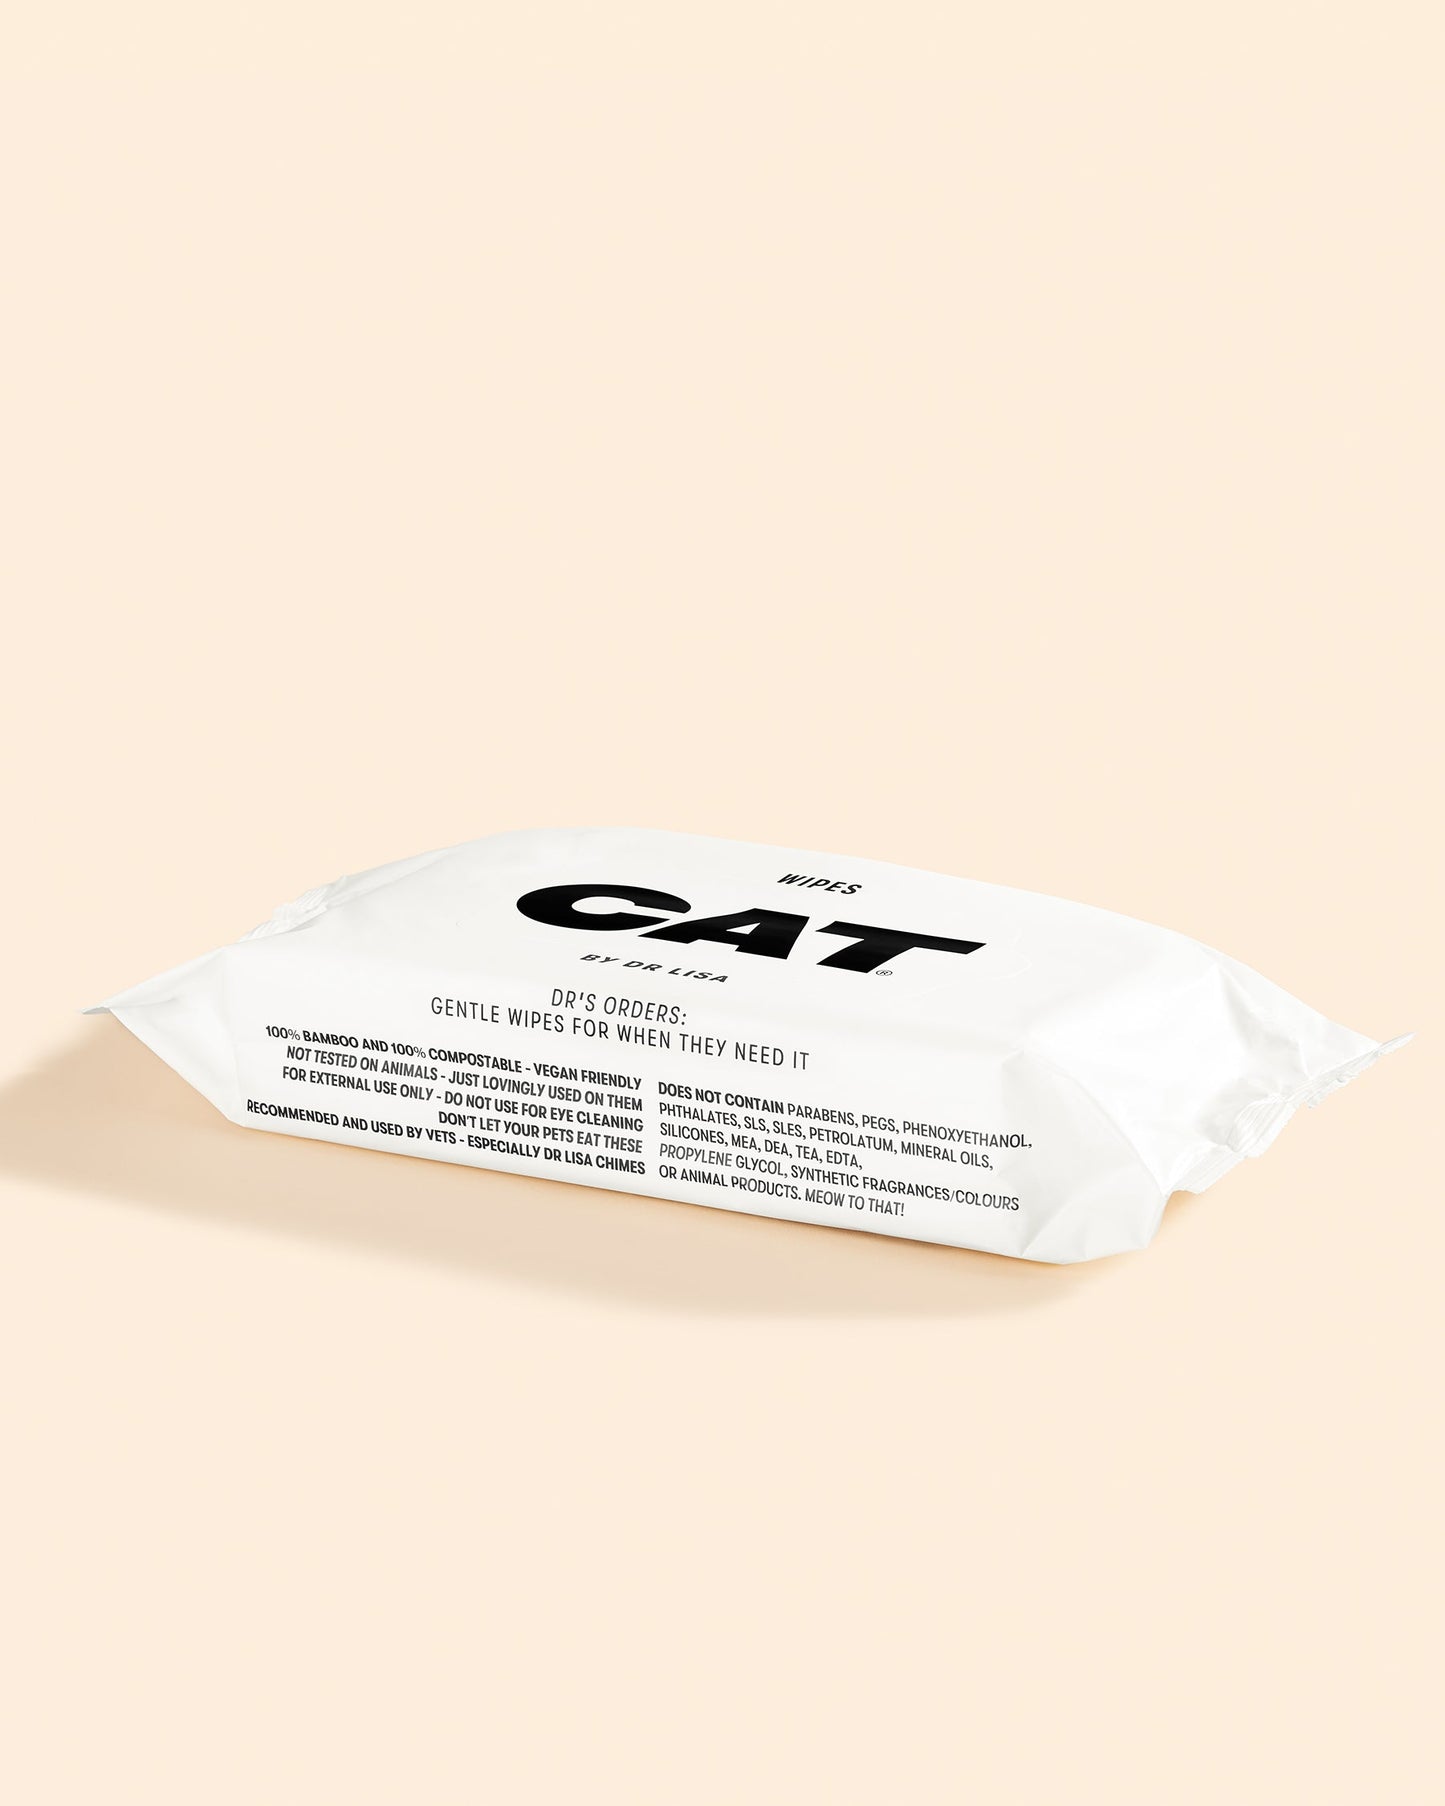 CAT by Dr Lisa Wipes 80pk